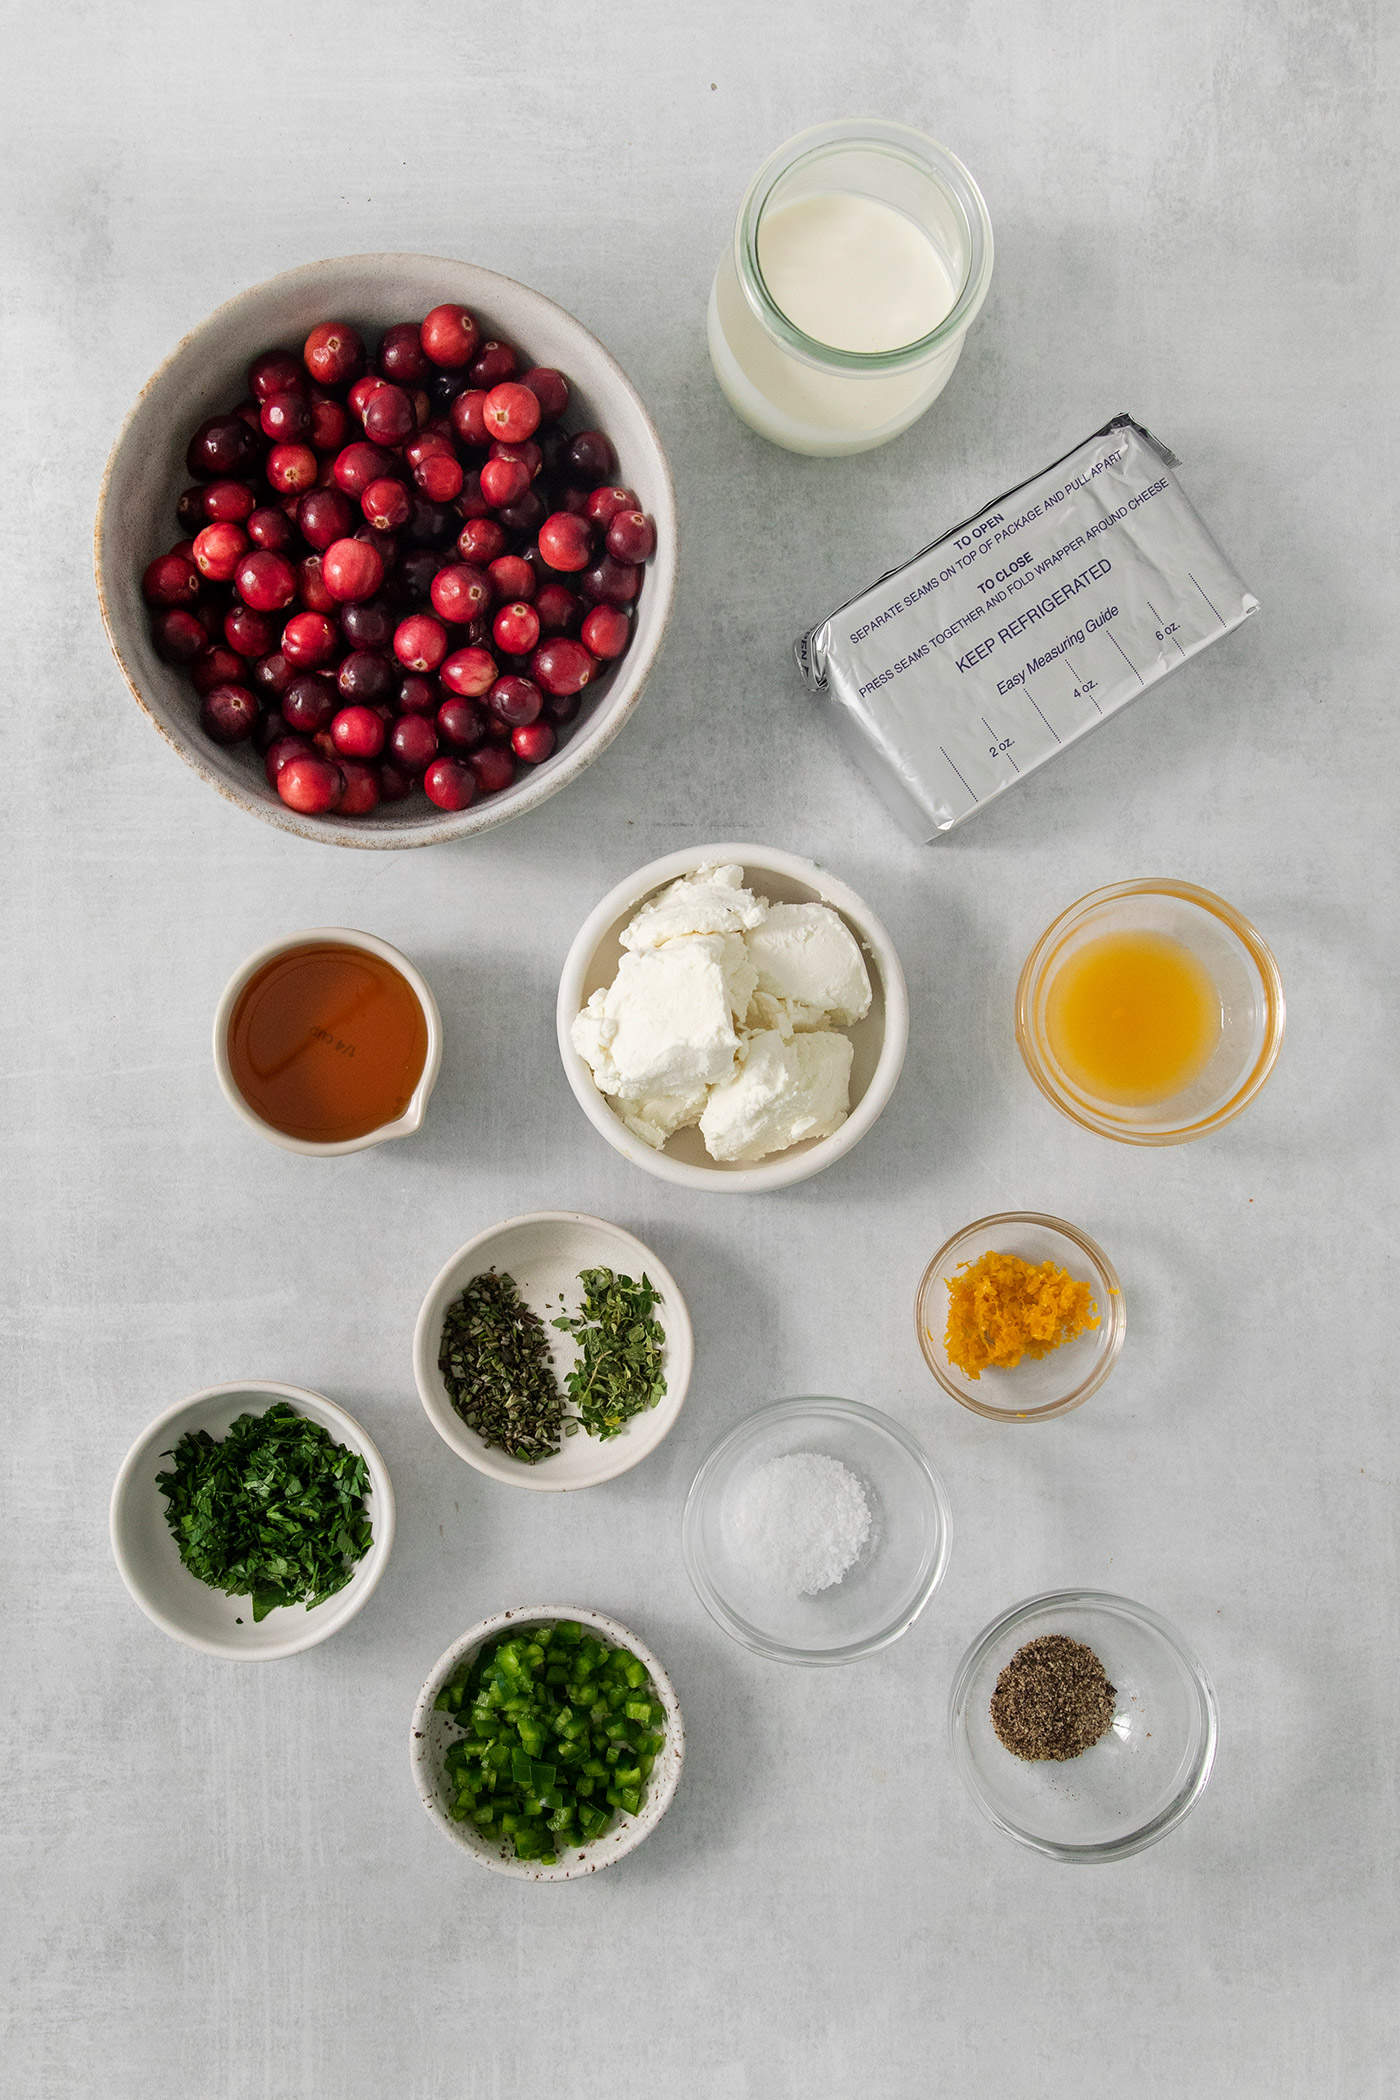 The ingredients to make cranberry jalapeno dip are shown on a white background: fresh cranberries, cream cheese, goat cheese, salt and pepper, herbs, orange juice, orange zest, jalapenos.